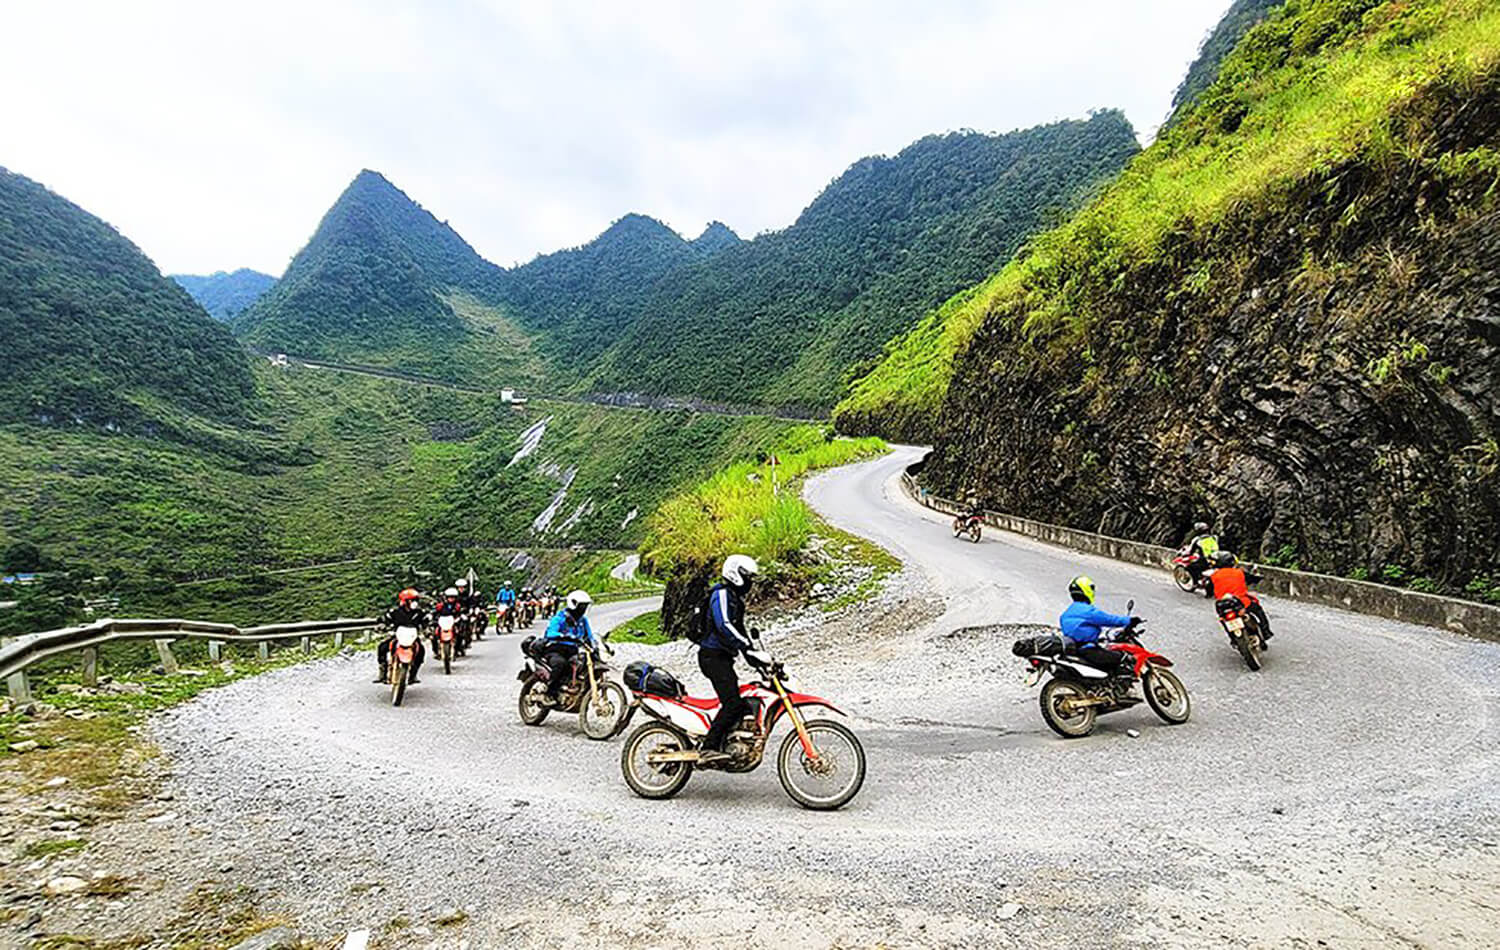 6 reasons to ride a motorcycle in Vietnam - incredible riding terrain